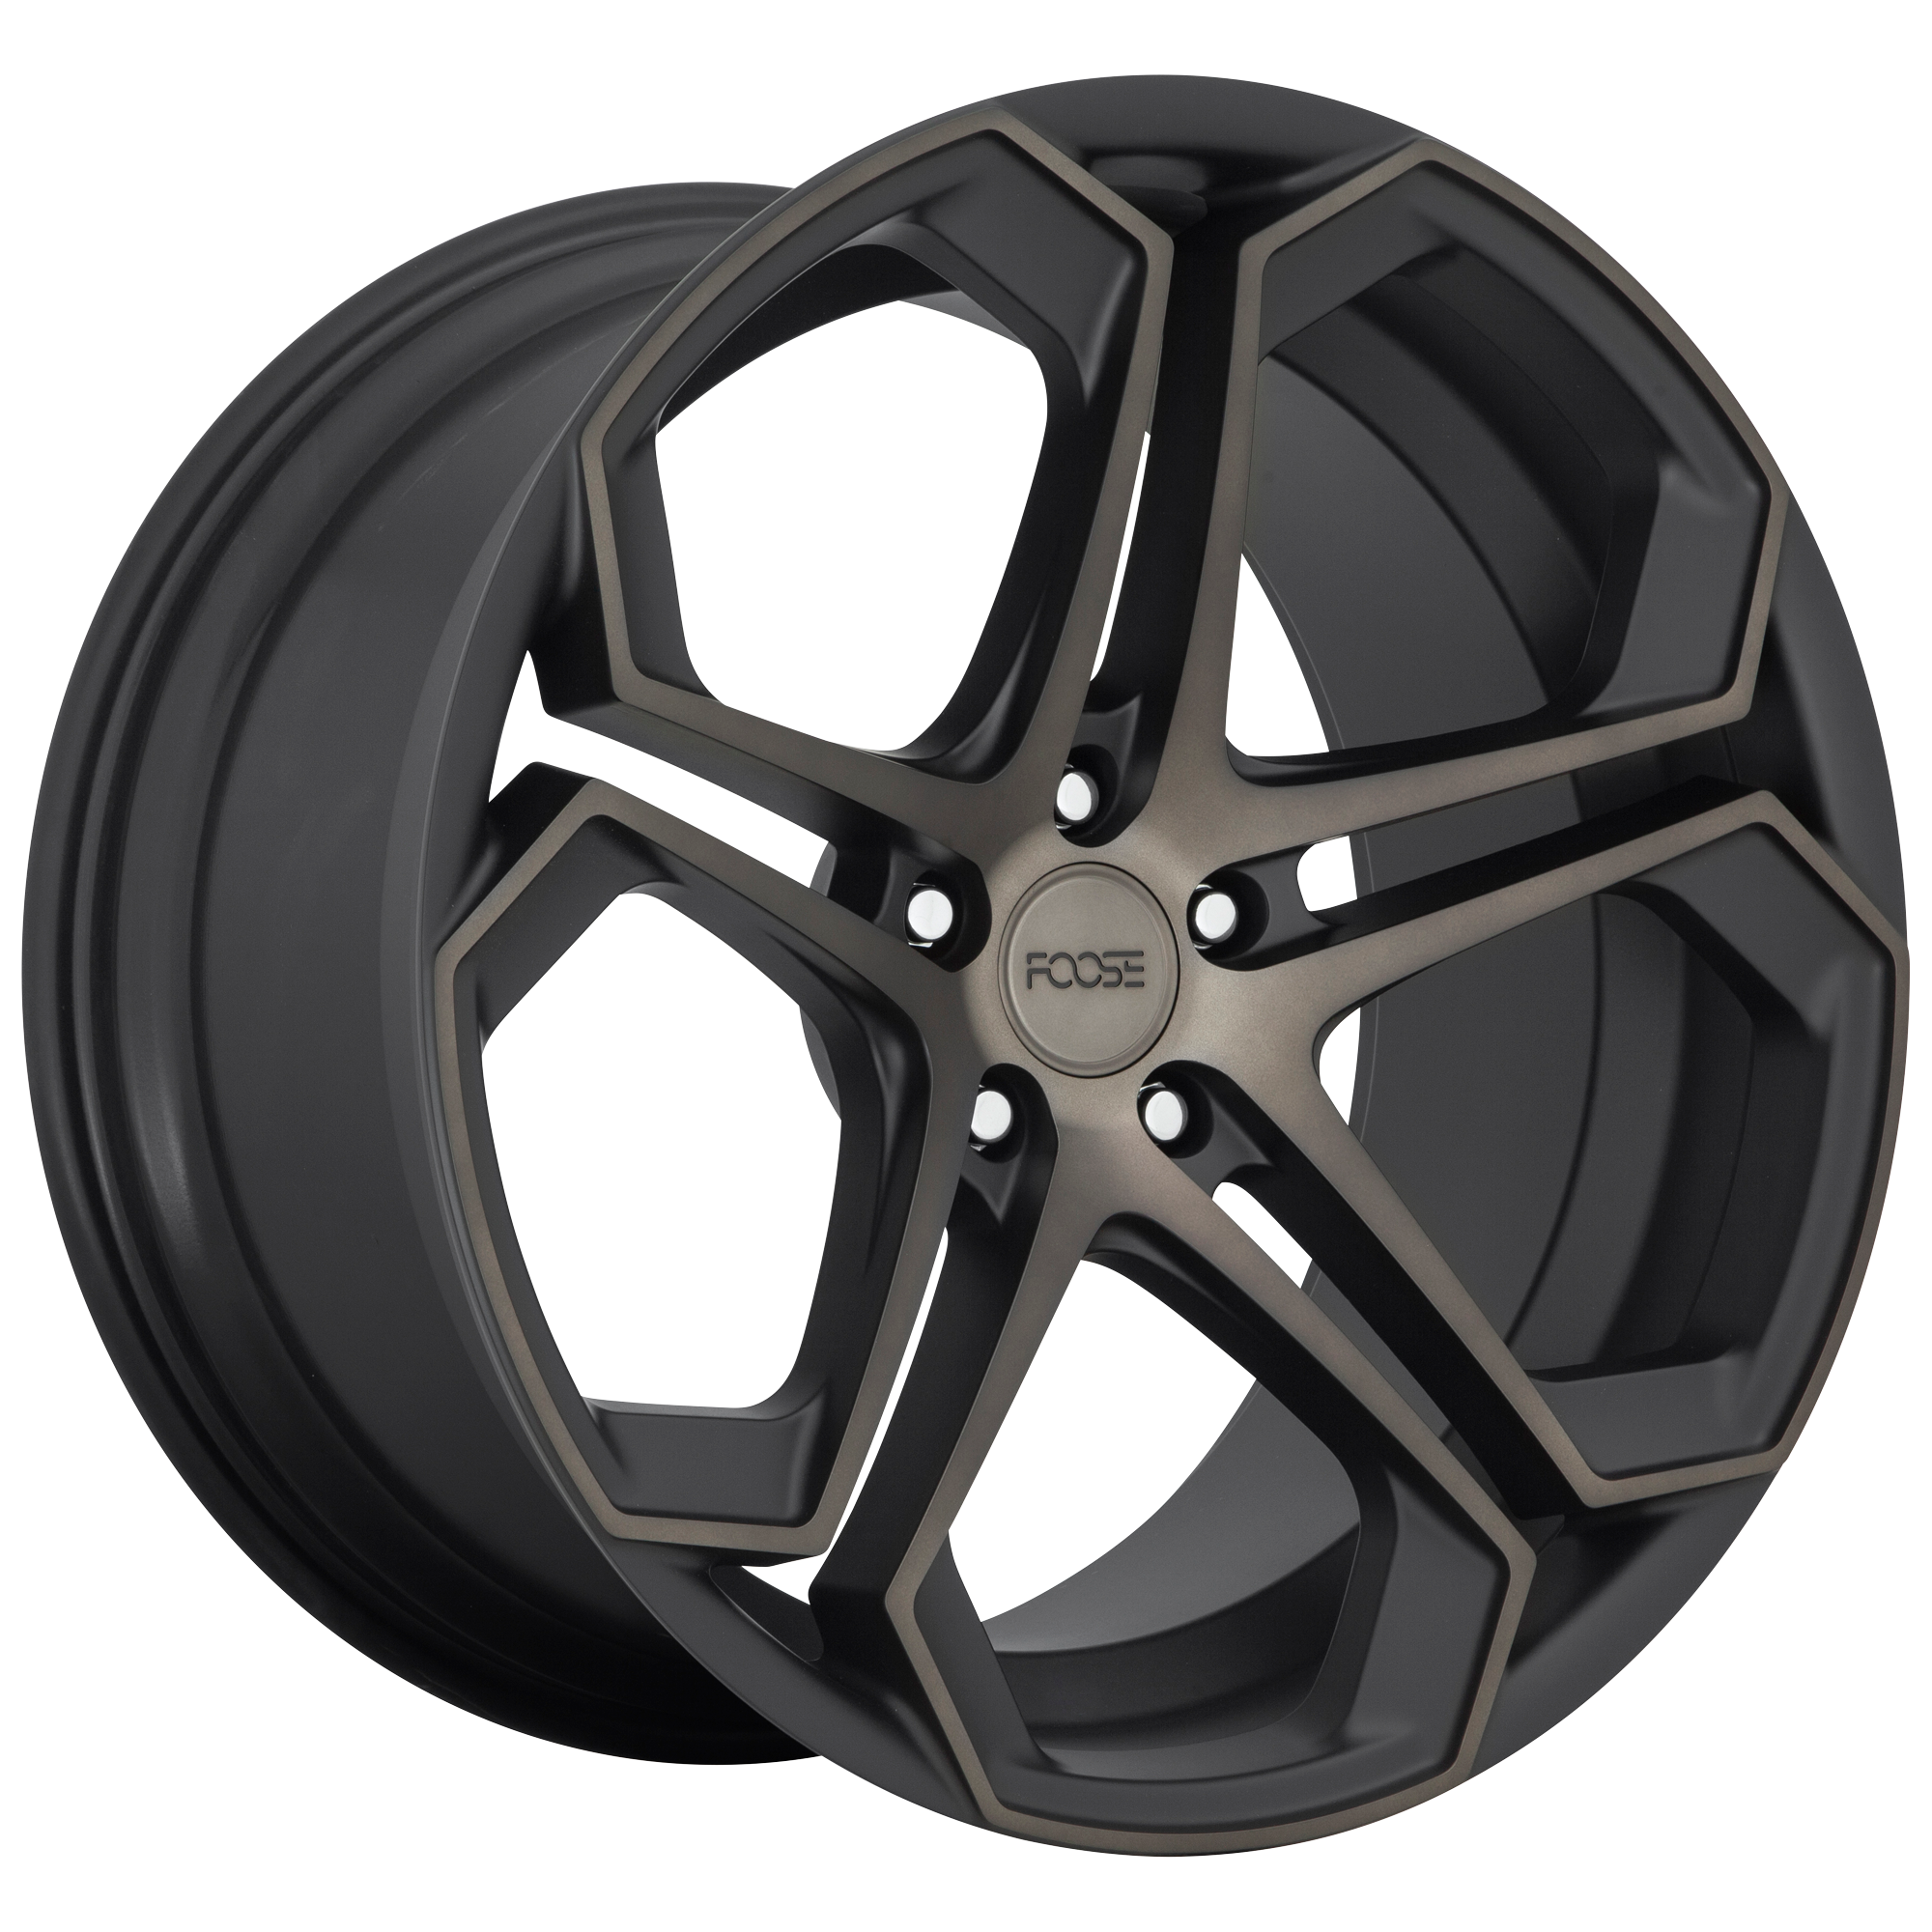 IMPALA 20x9 5x120.00 MATTE MACHINED DOUBLE DARK TINT (35 mm) - Tires and Engine Performance